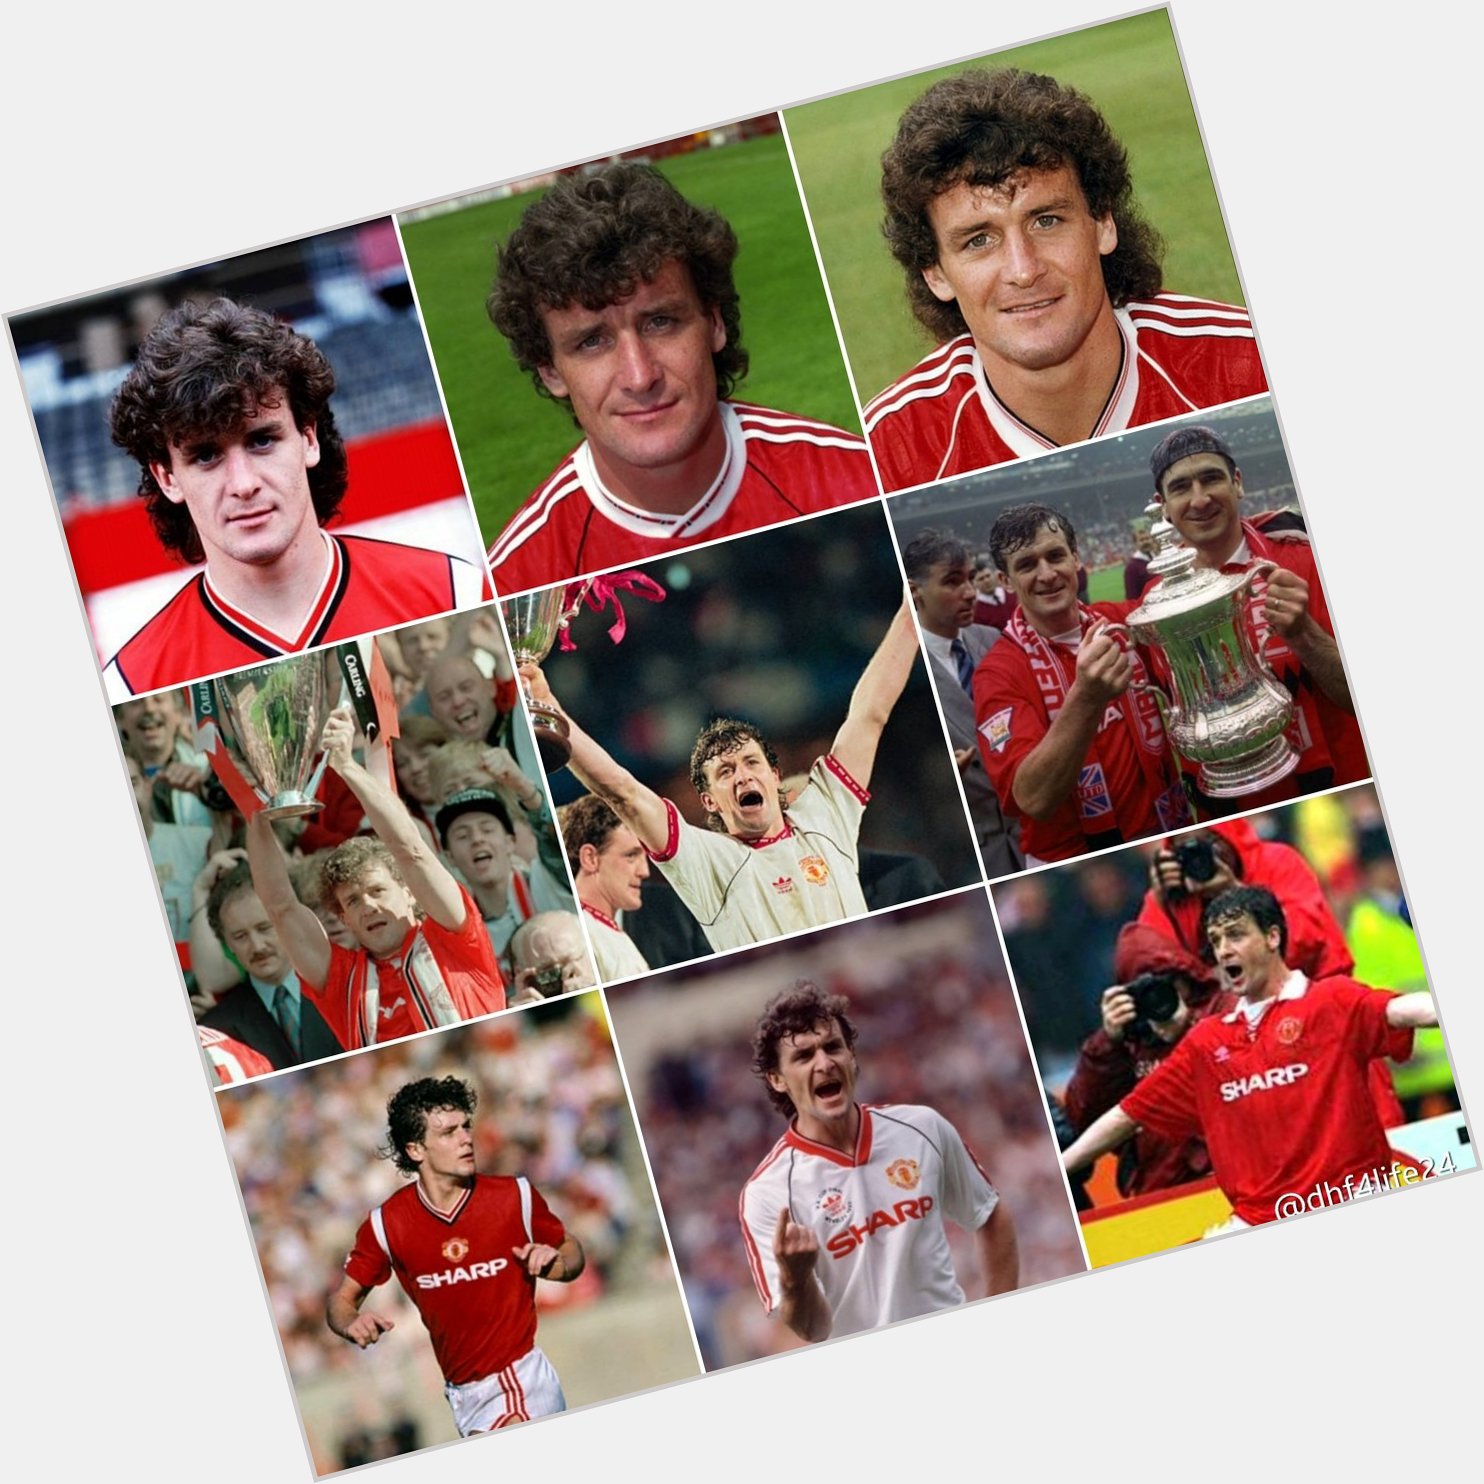 Happy 59th Birthday   on 01st November 2022 to Mark Hughes - What a Player and LEGEND... 